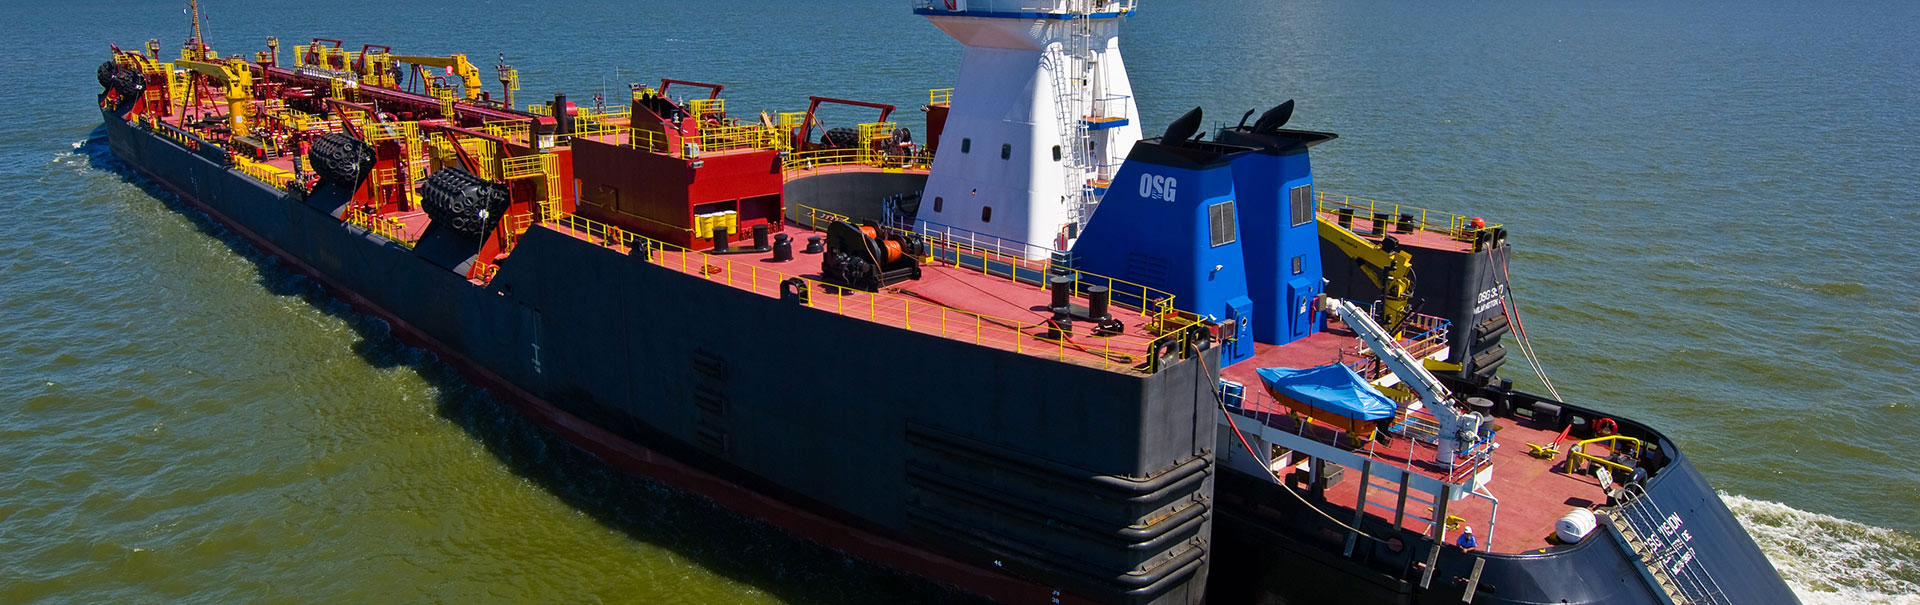 Overseas Shipholding Group, Inc. Announces Agreements to Purchase and Time Charter Vessels